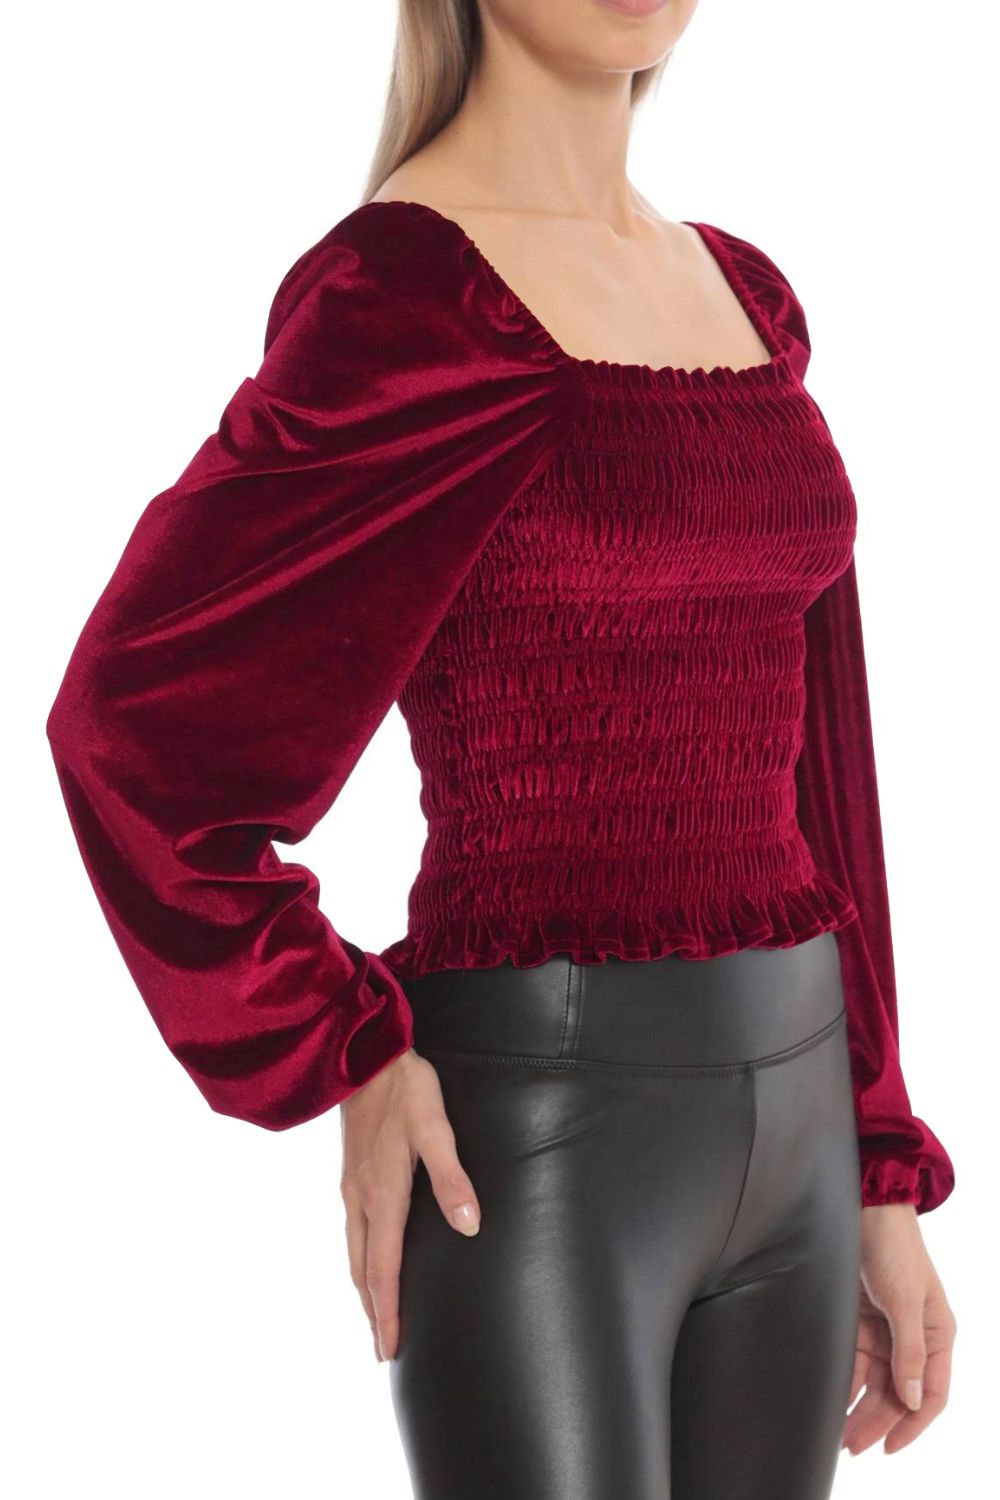 Velvet Holiday Top choice of colors